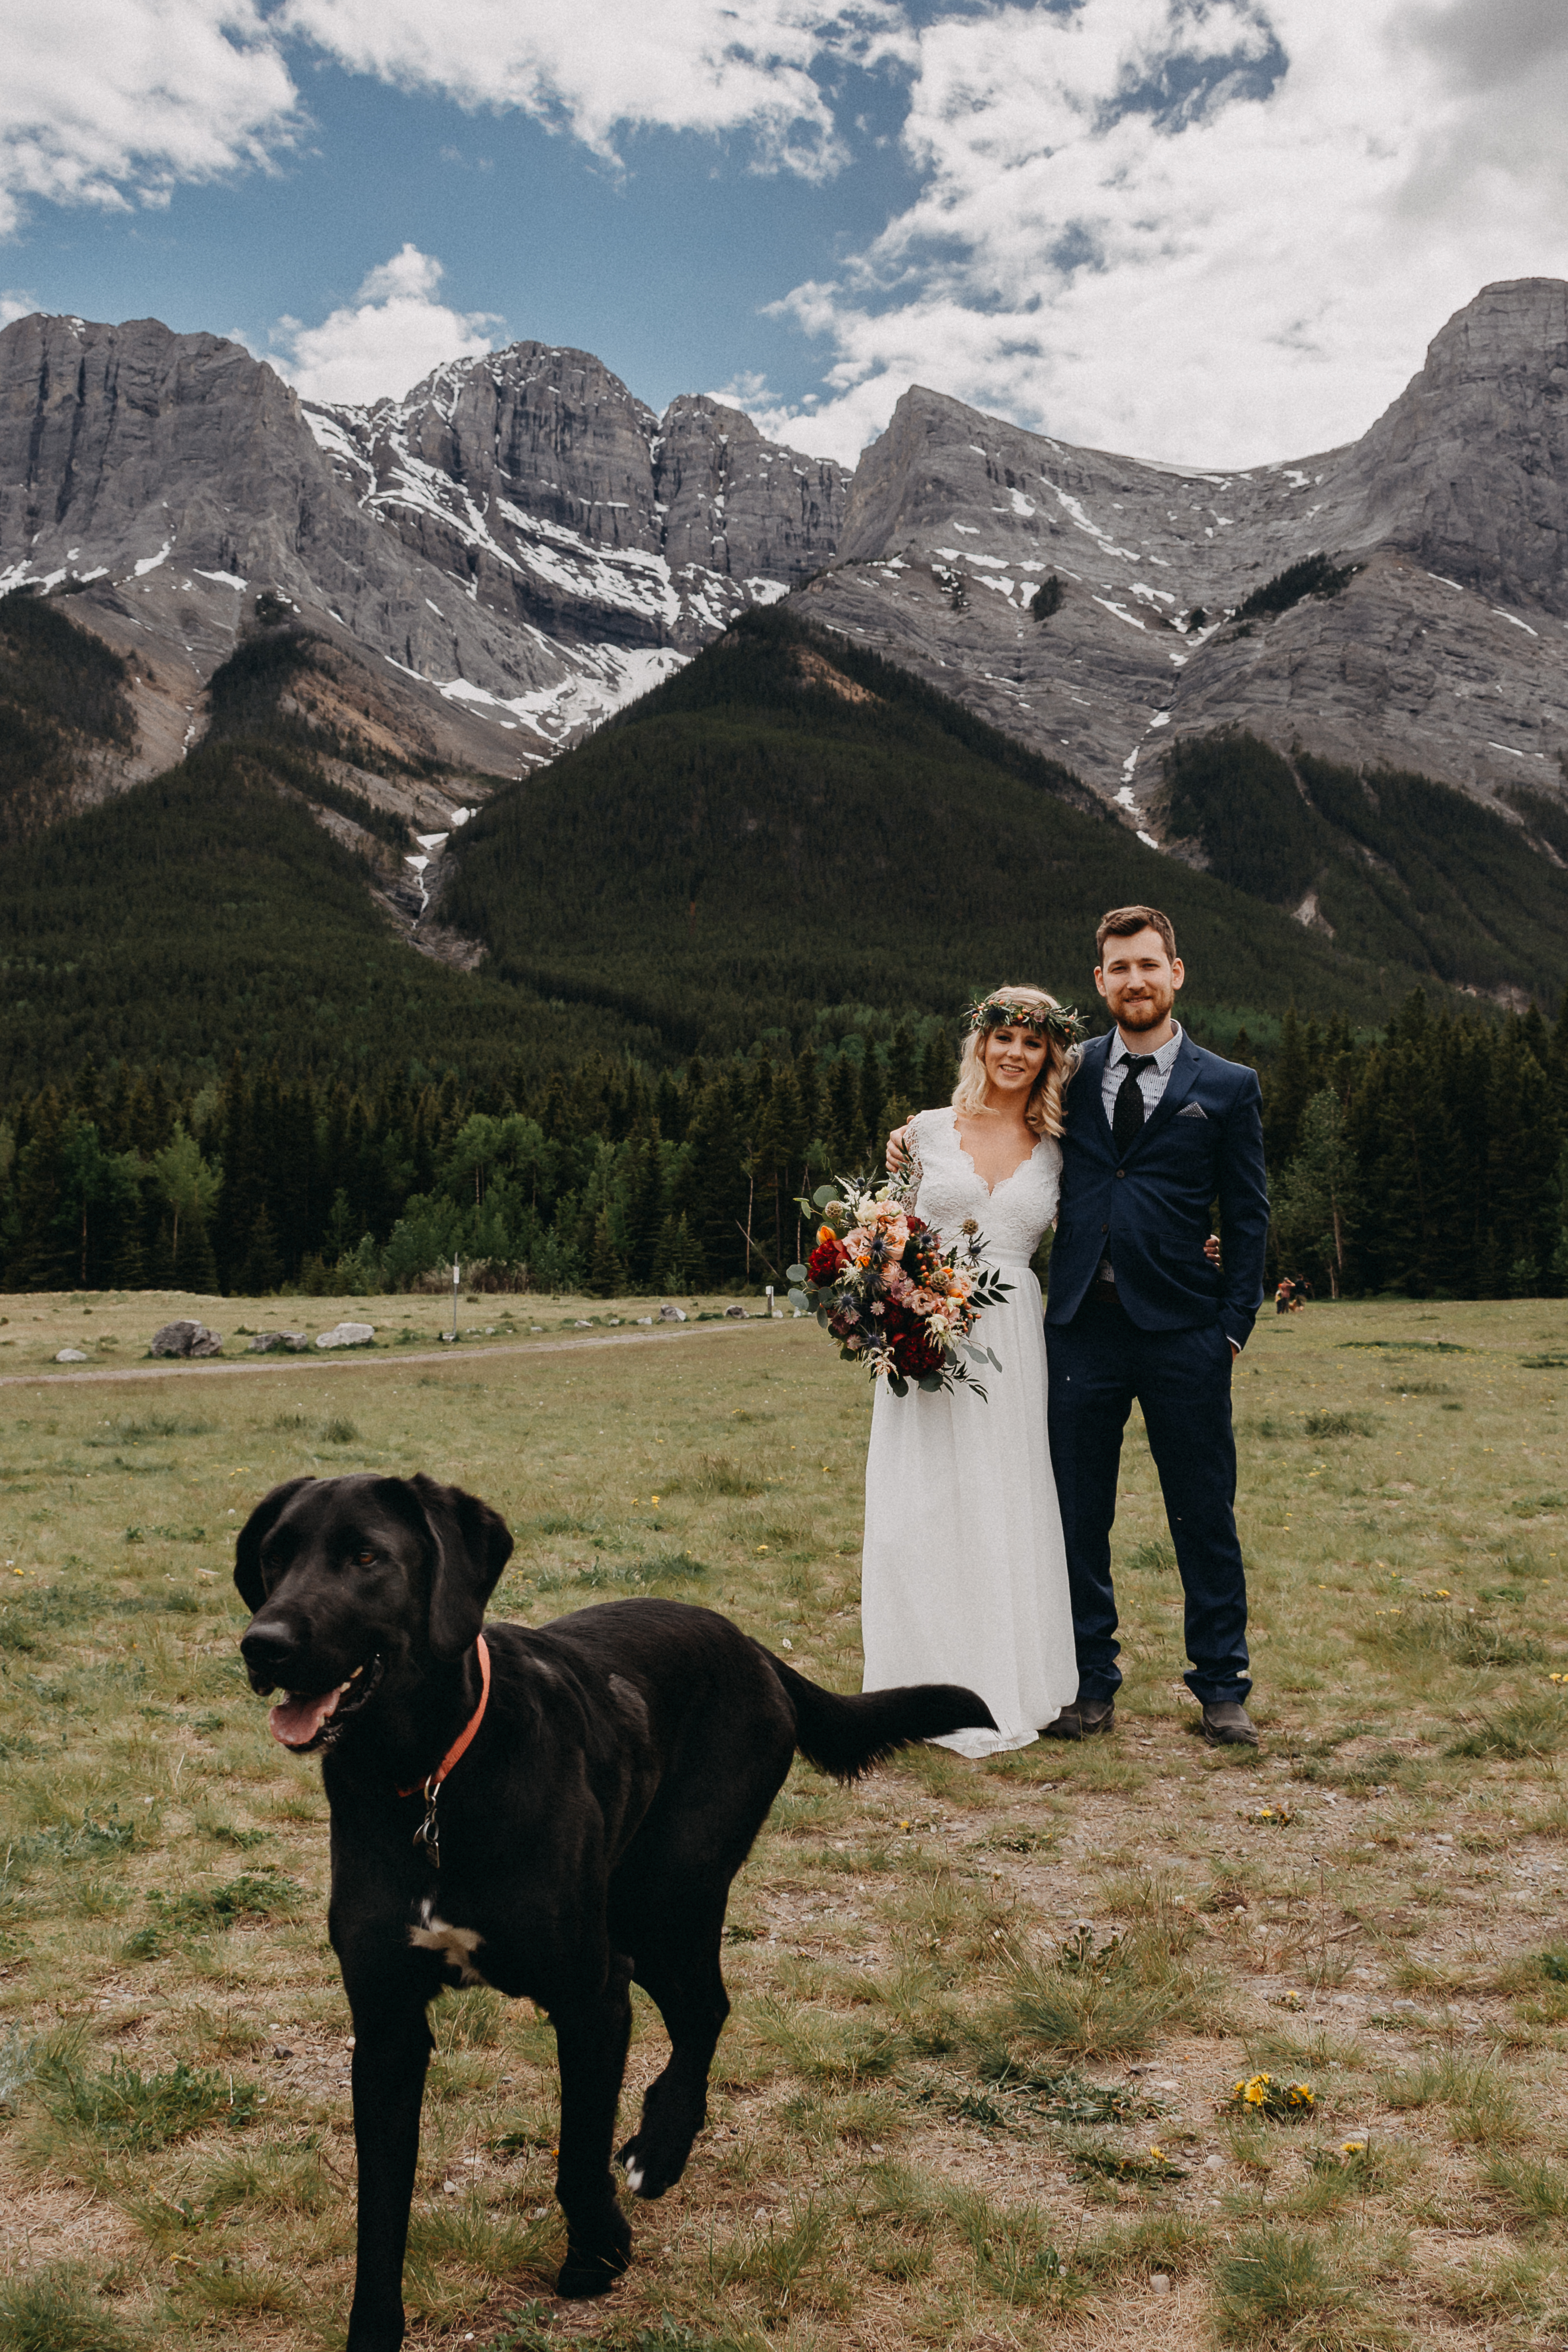 The bride and groom holding each other and their dog in front of the rocky mountains